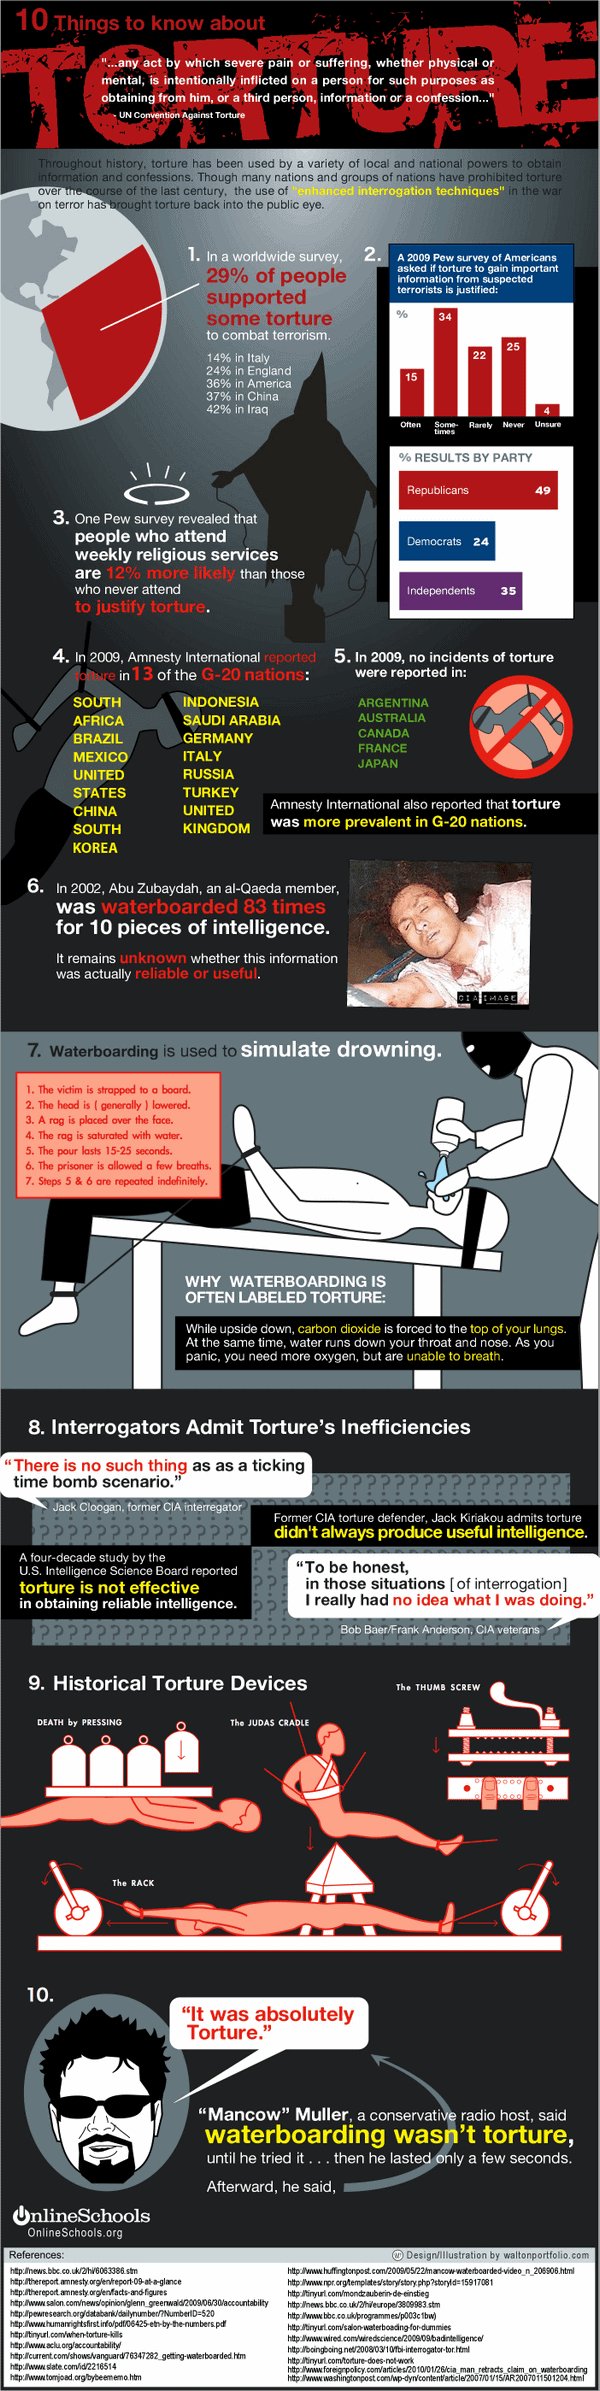 10 Things To Know About Torture